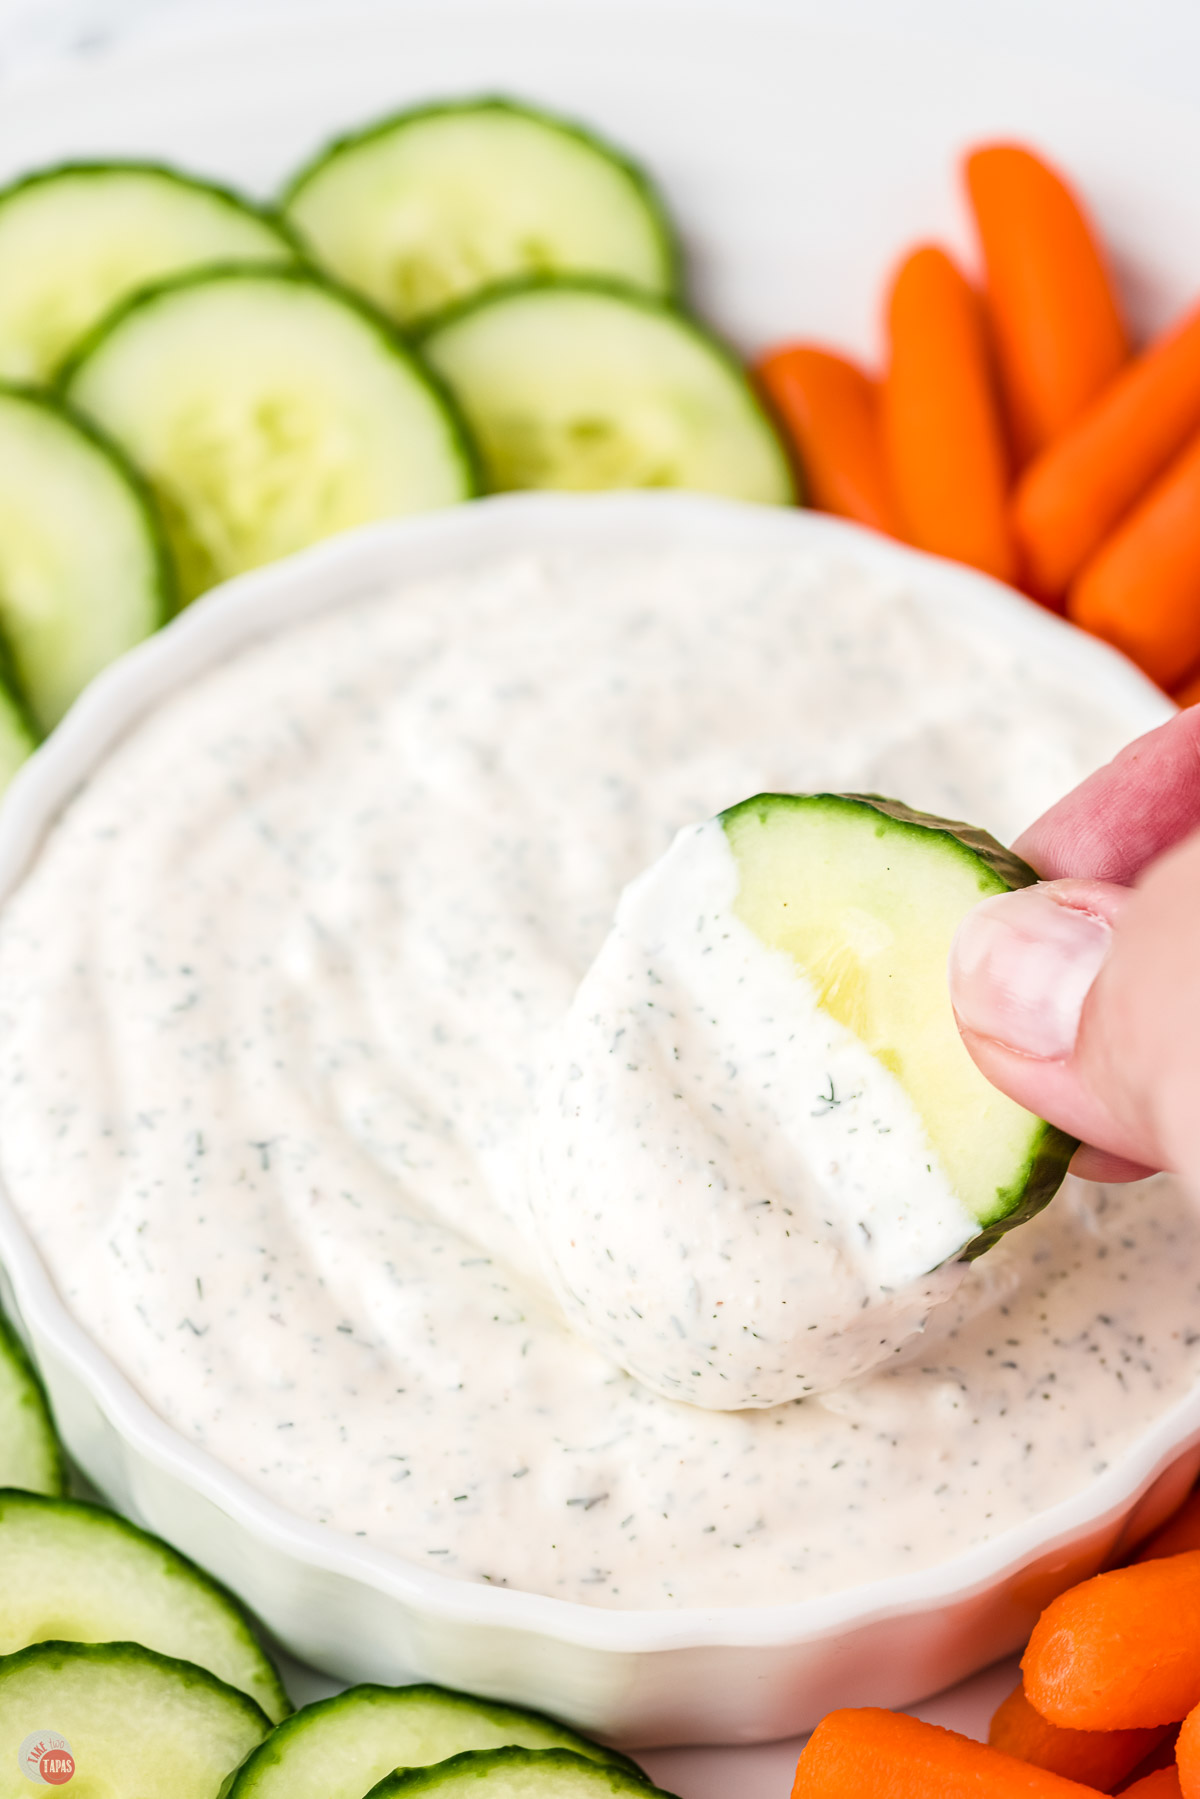 creamy dip in a white bowl with carrots and cucumbers